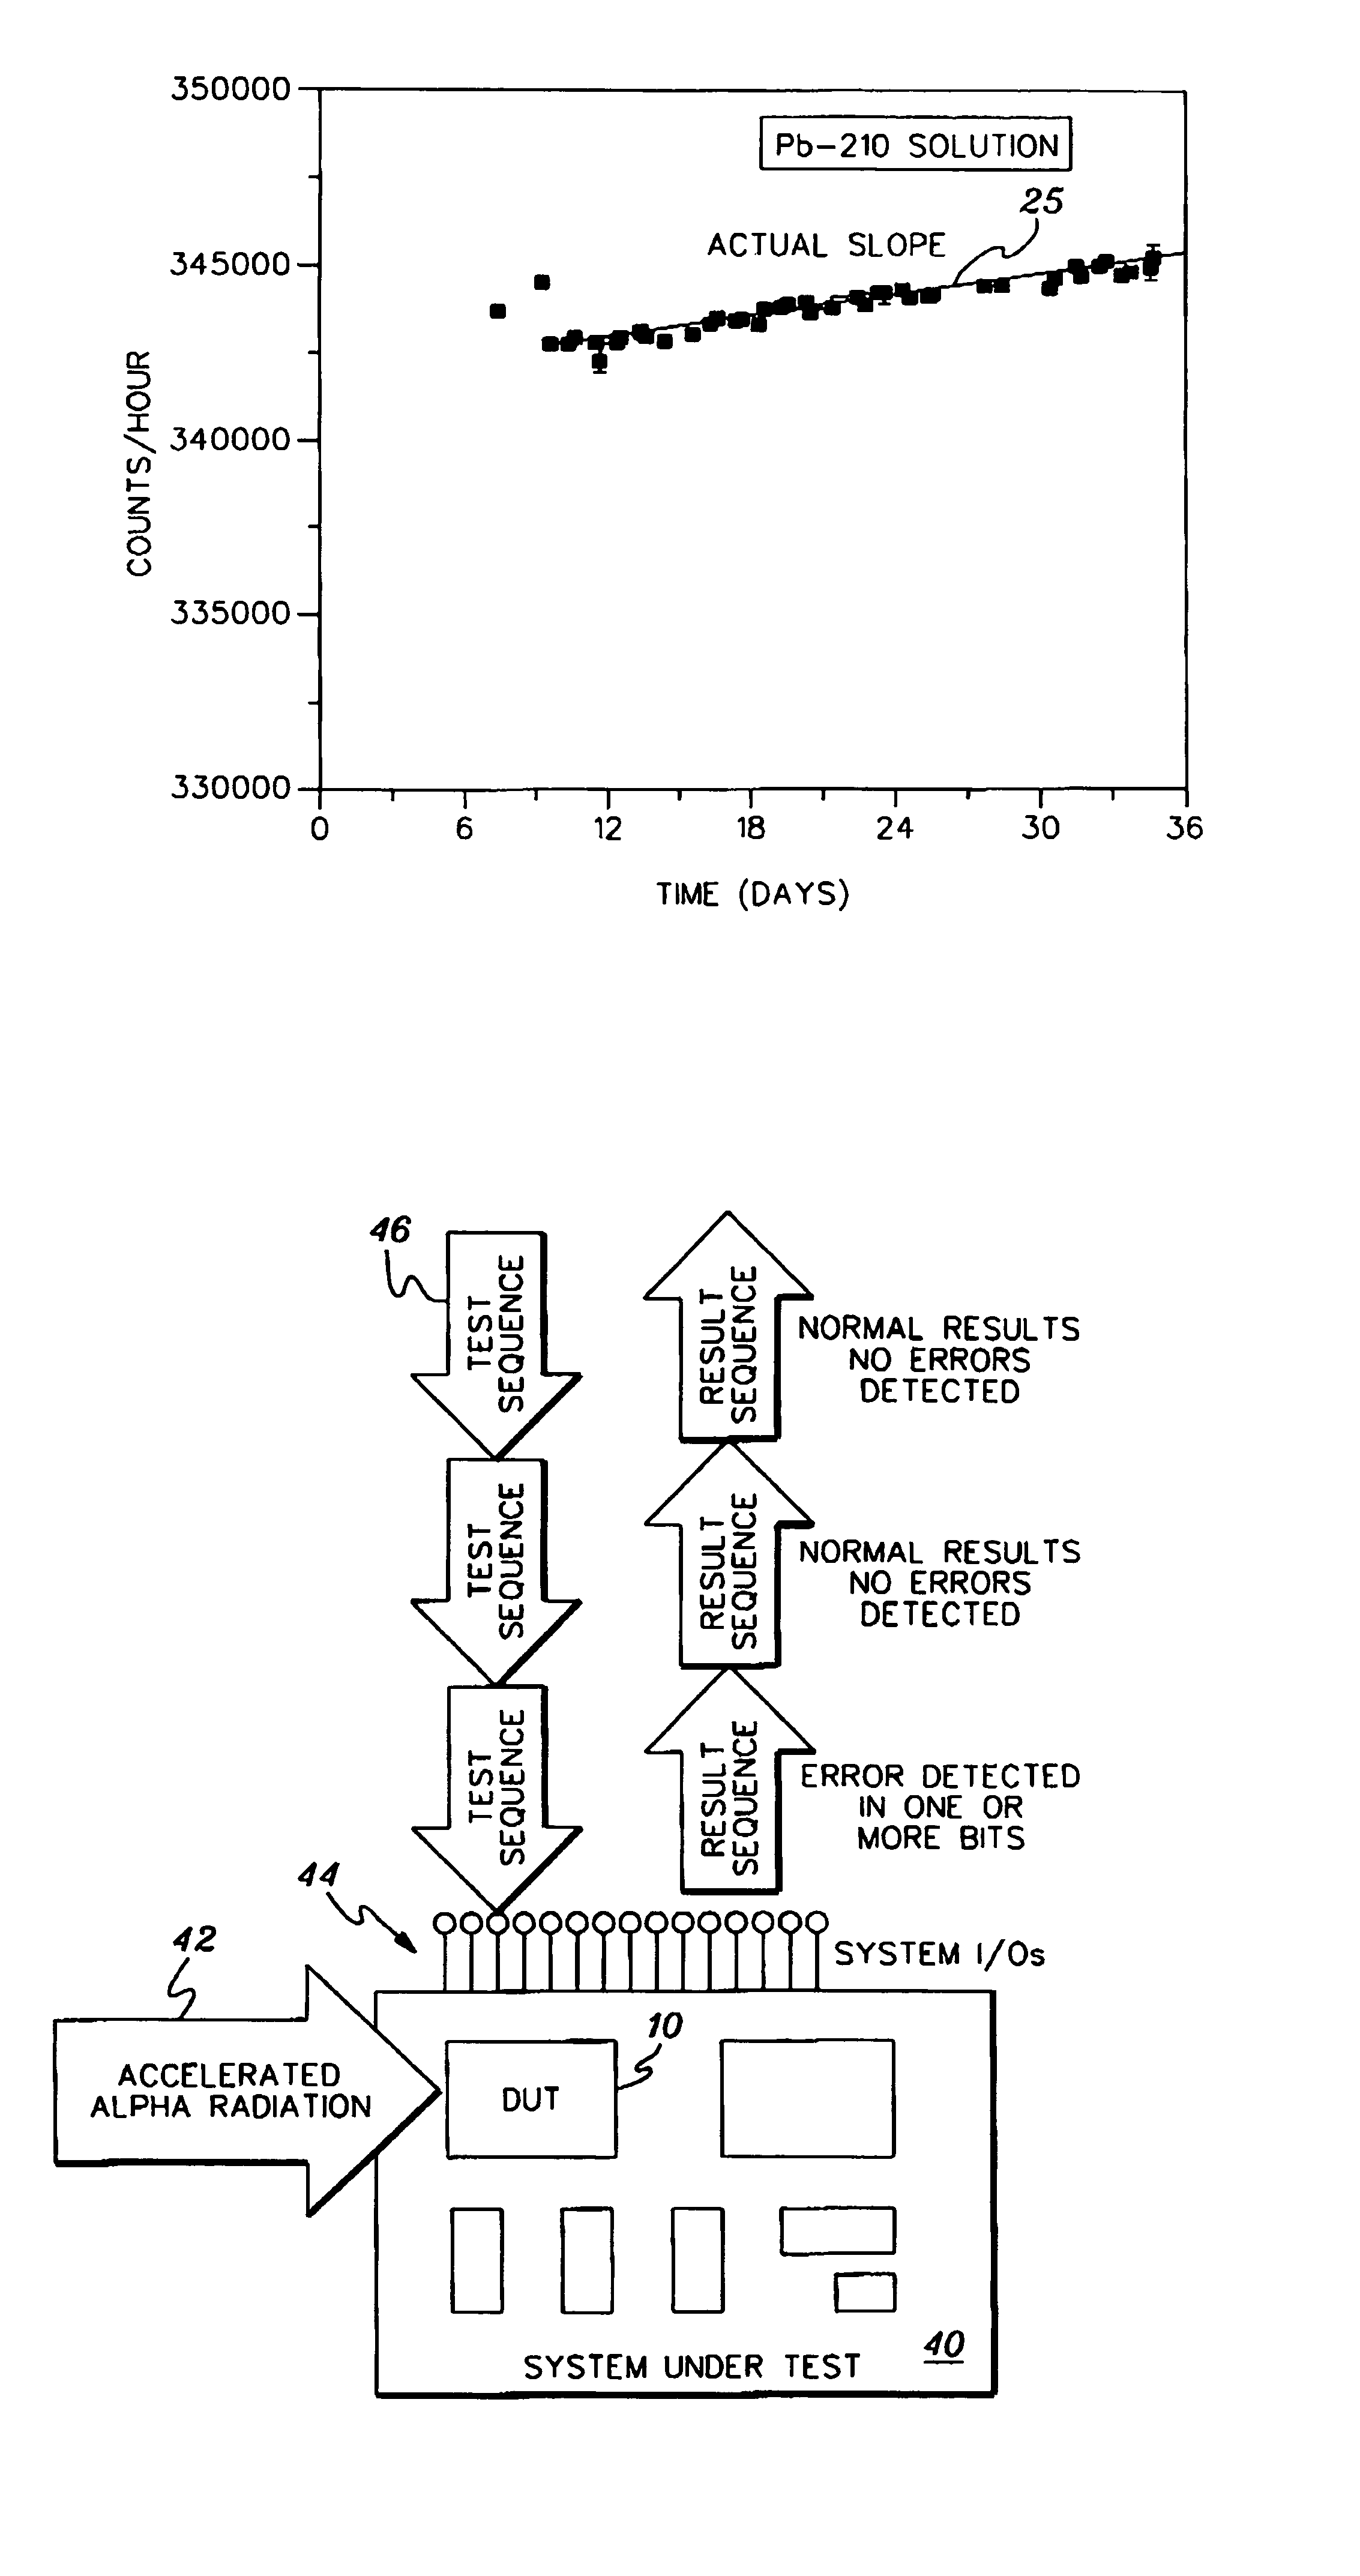 System and method for accelerated detection of transient particle induced soft error rates in integrated circuits